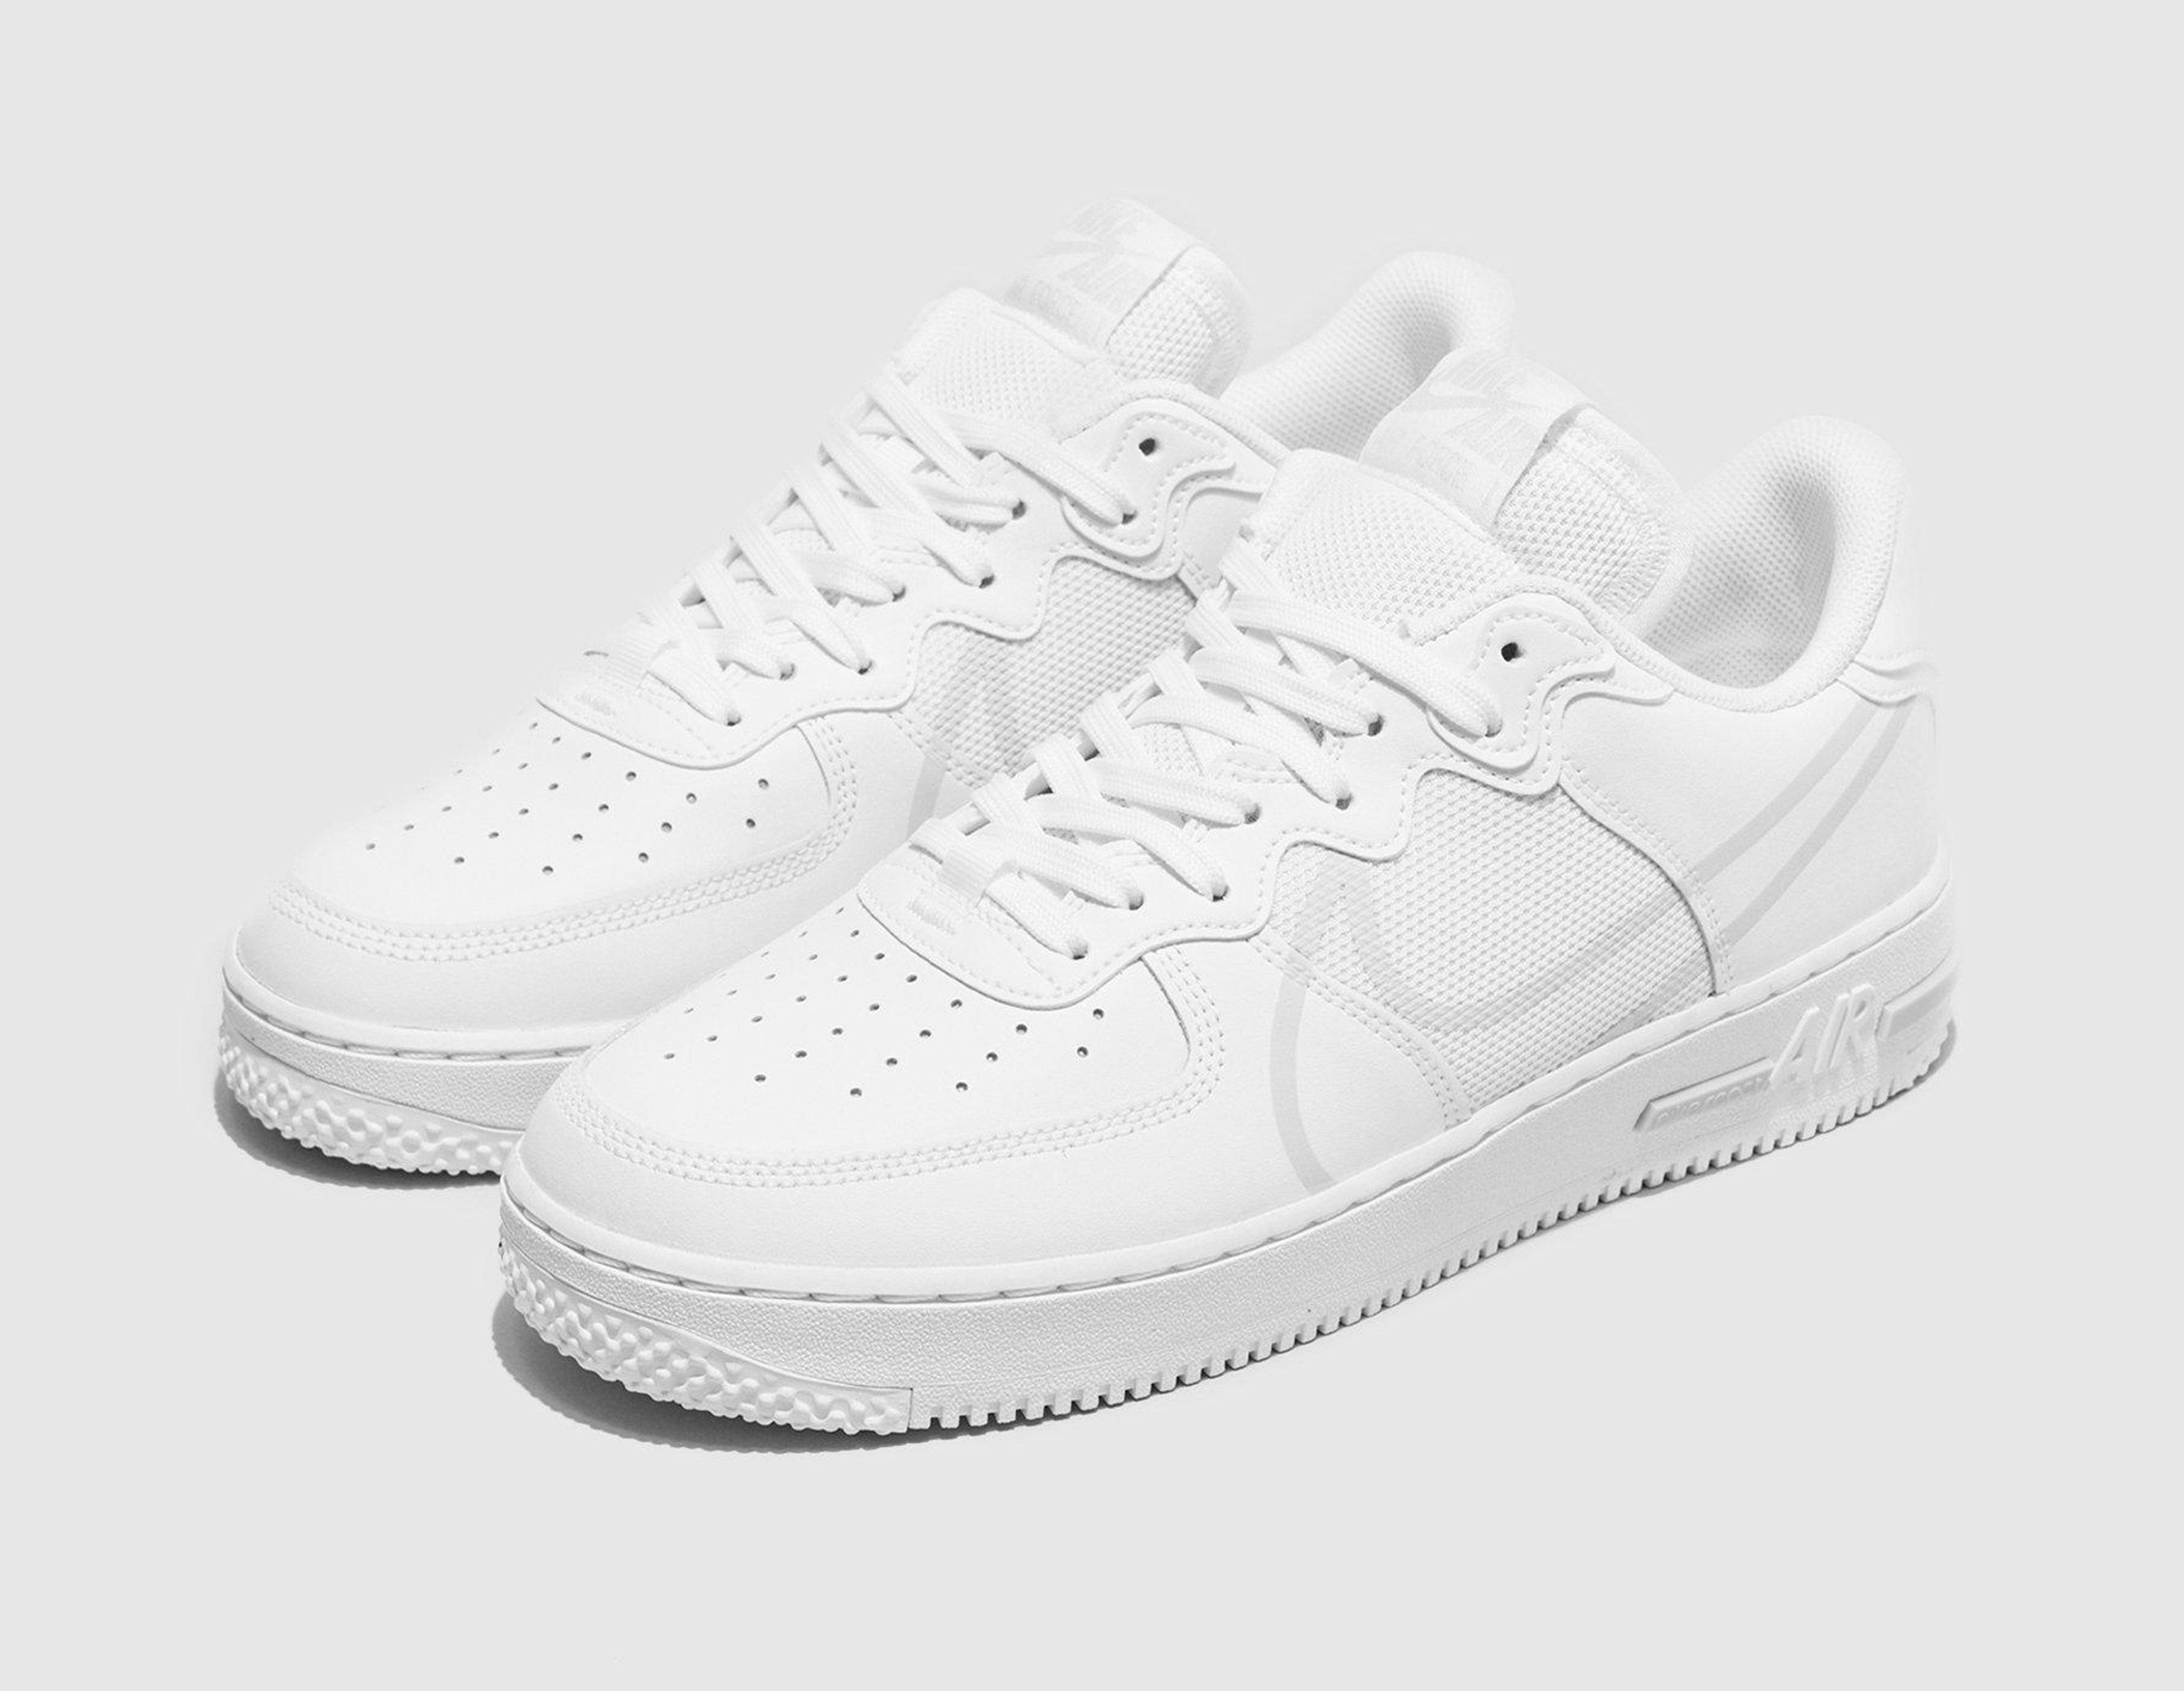 air force 1 size review